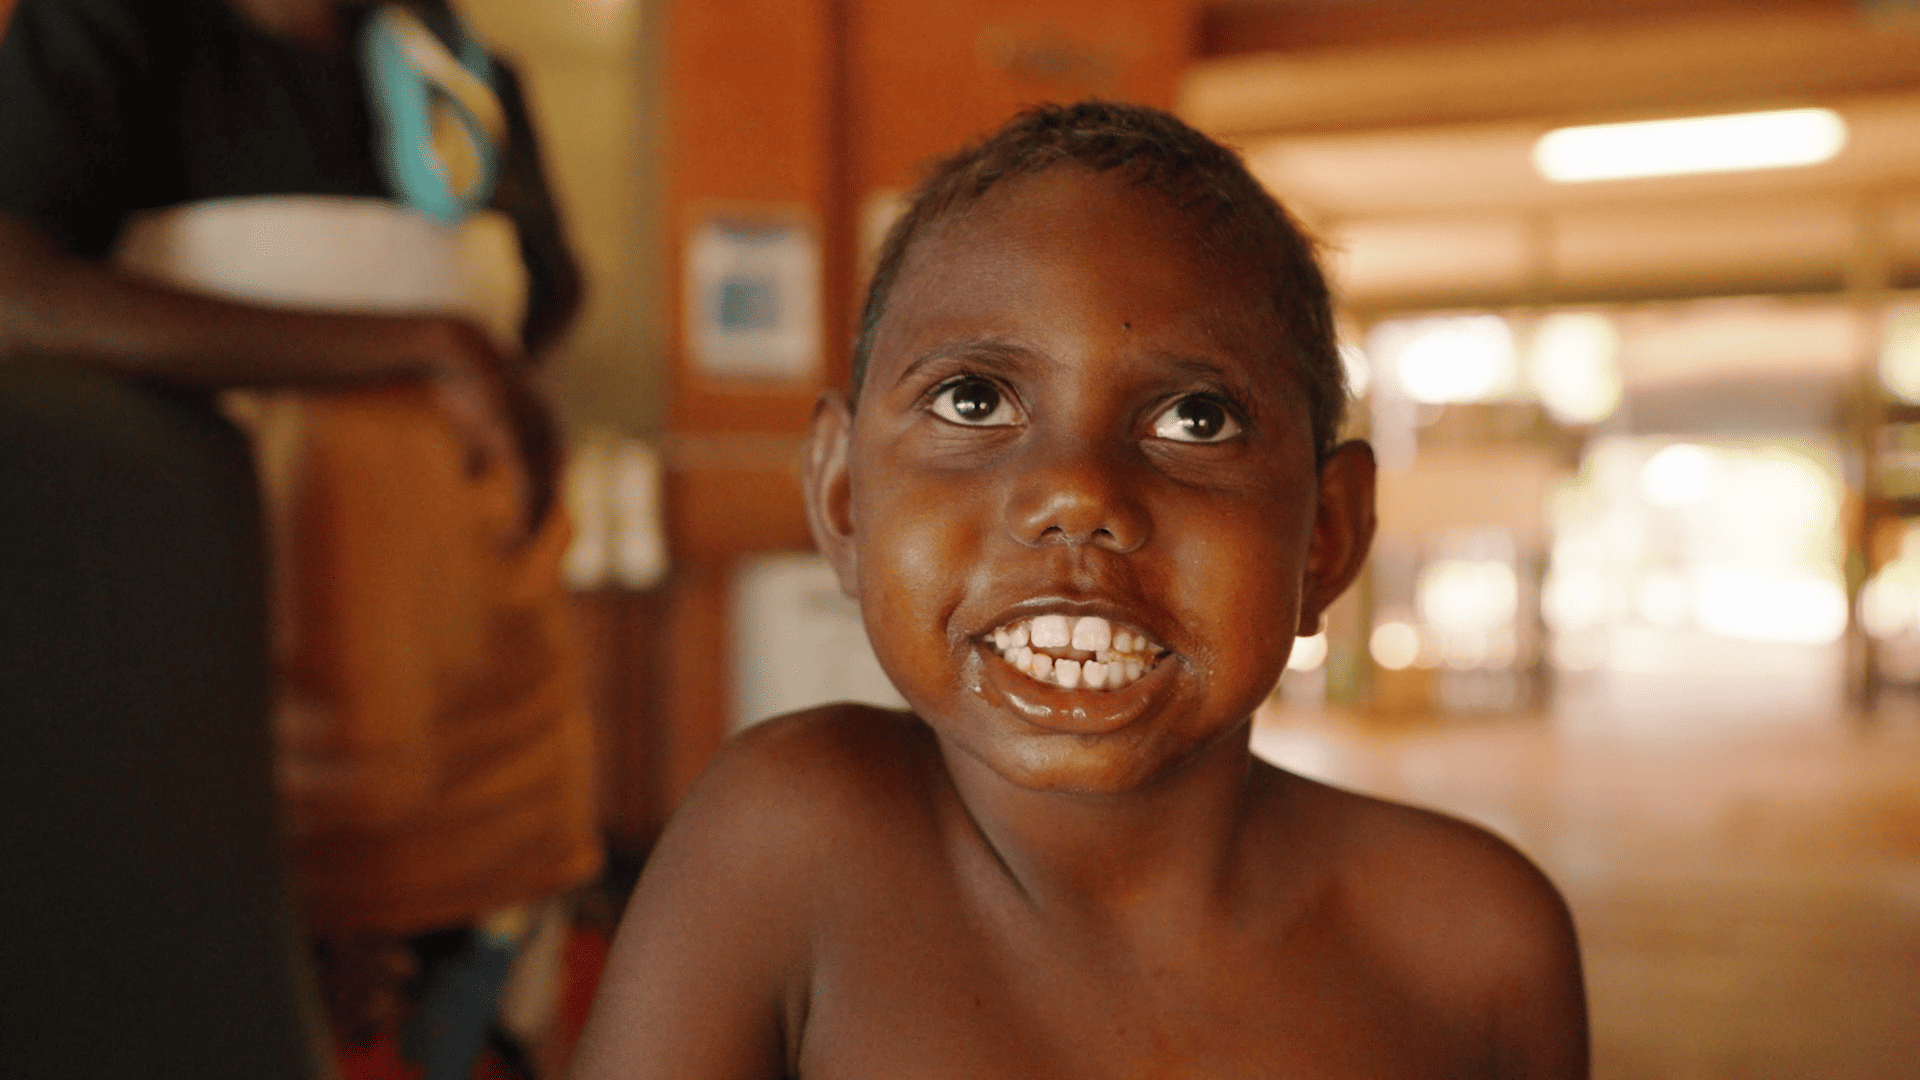 A young Indigenous boy is looking up and smiling.